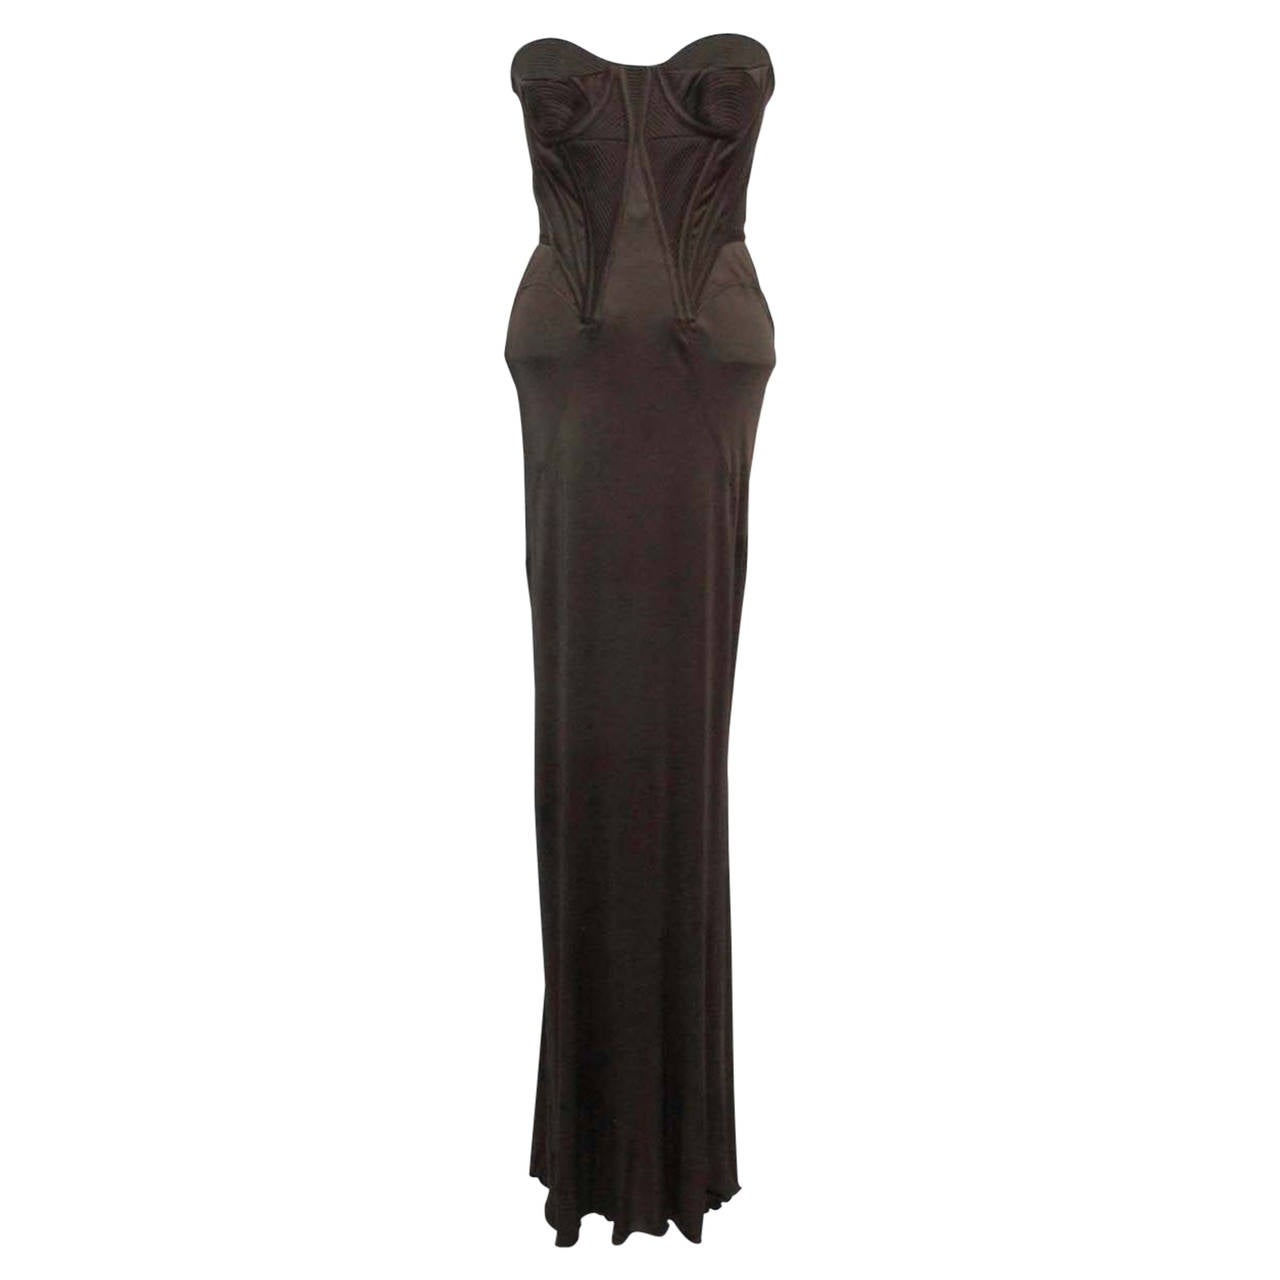 Gianni Versace Spring - Summer 2007 Runway Brown Corseted - Bodycon Evening Gown For Sale